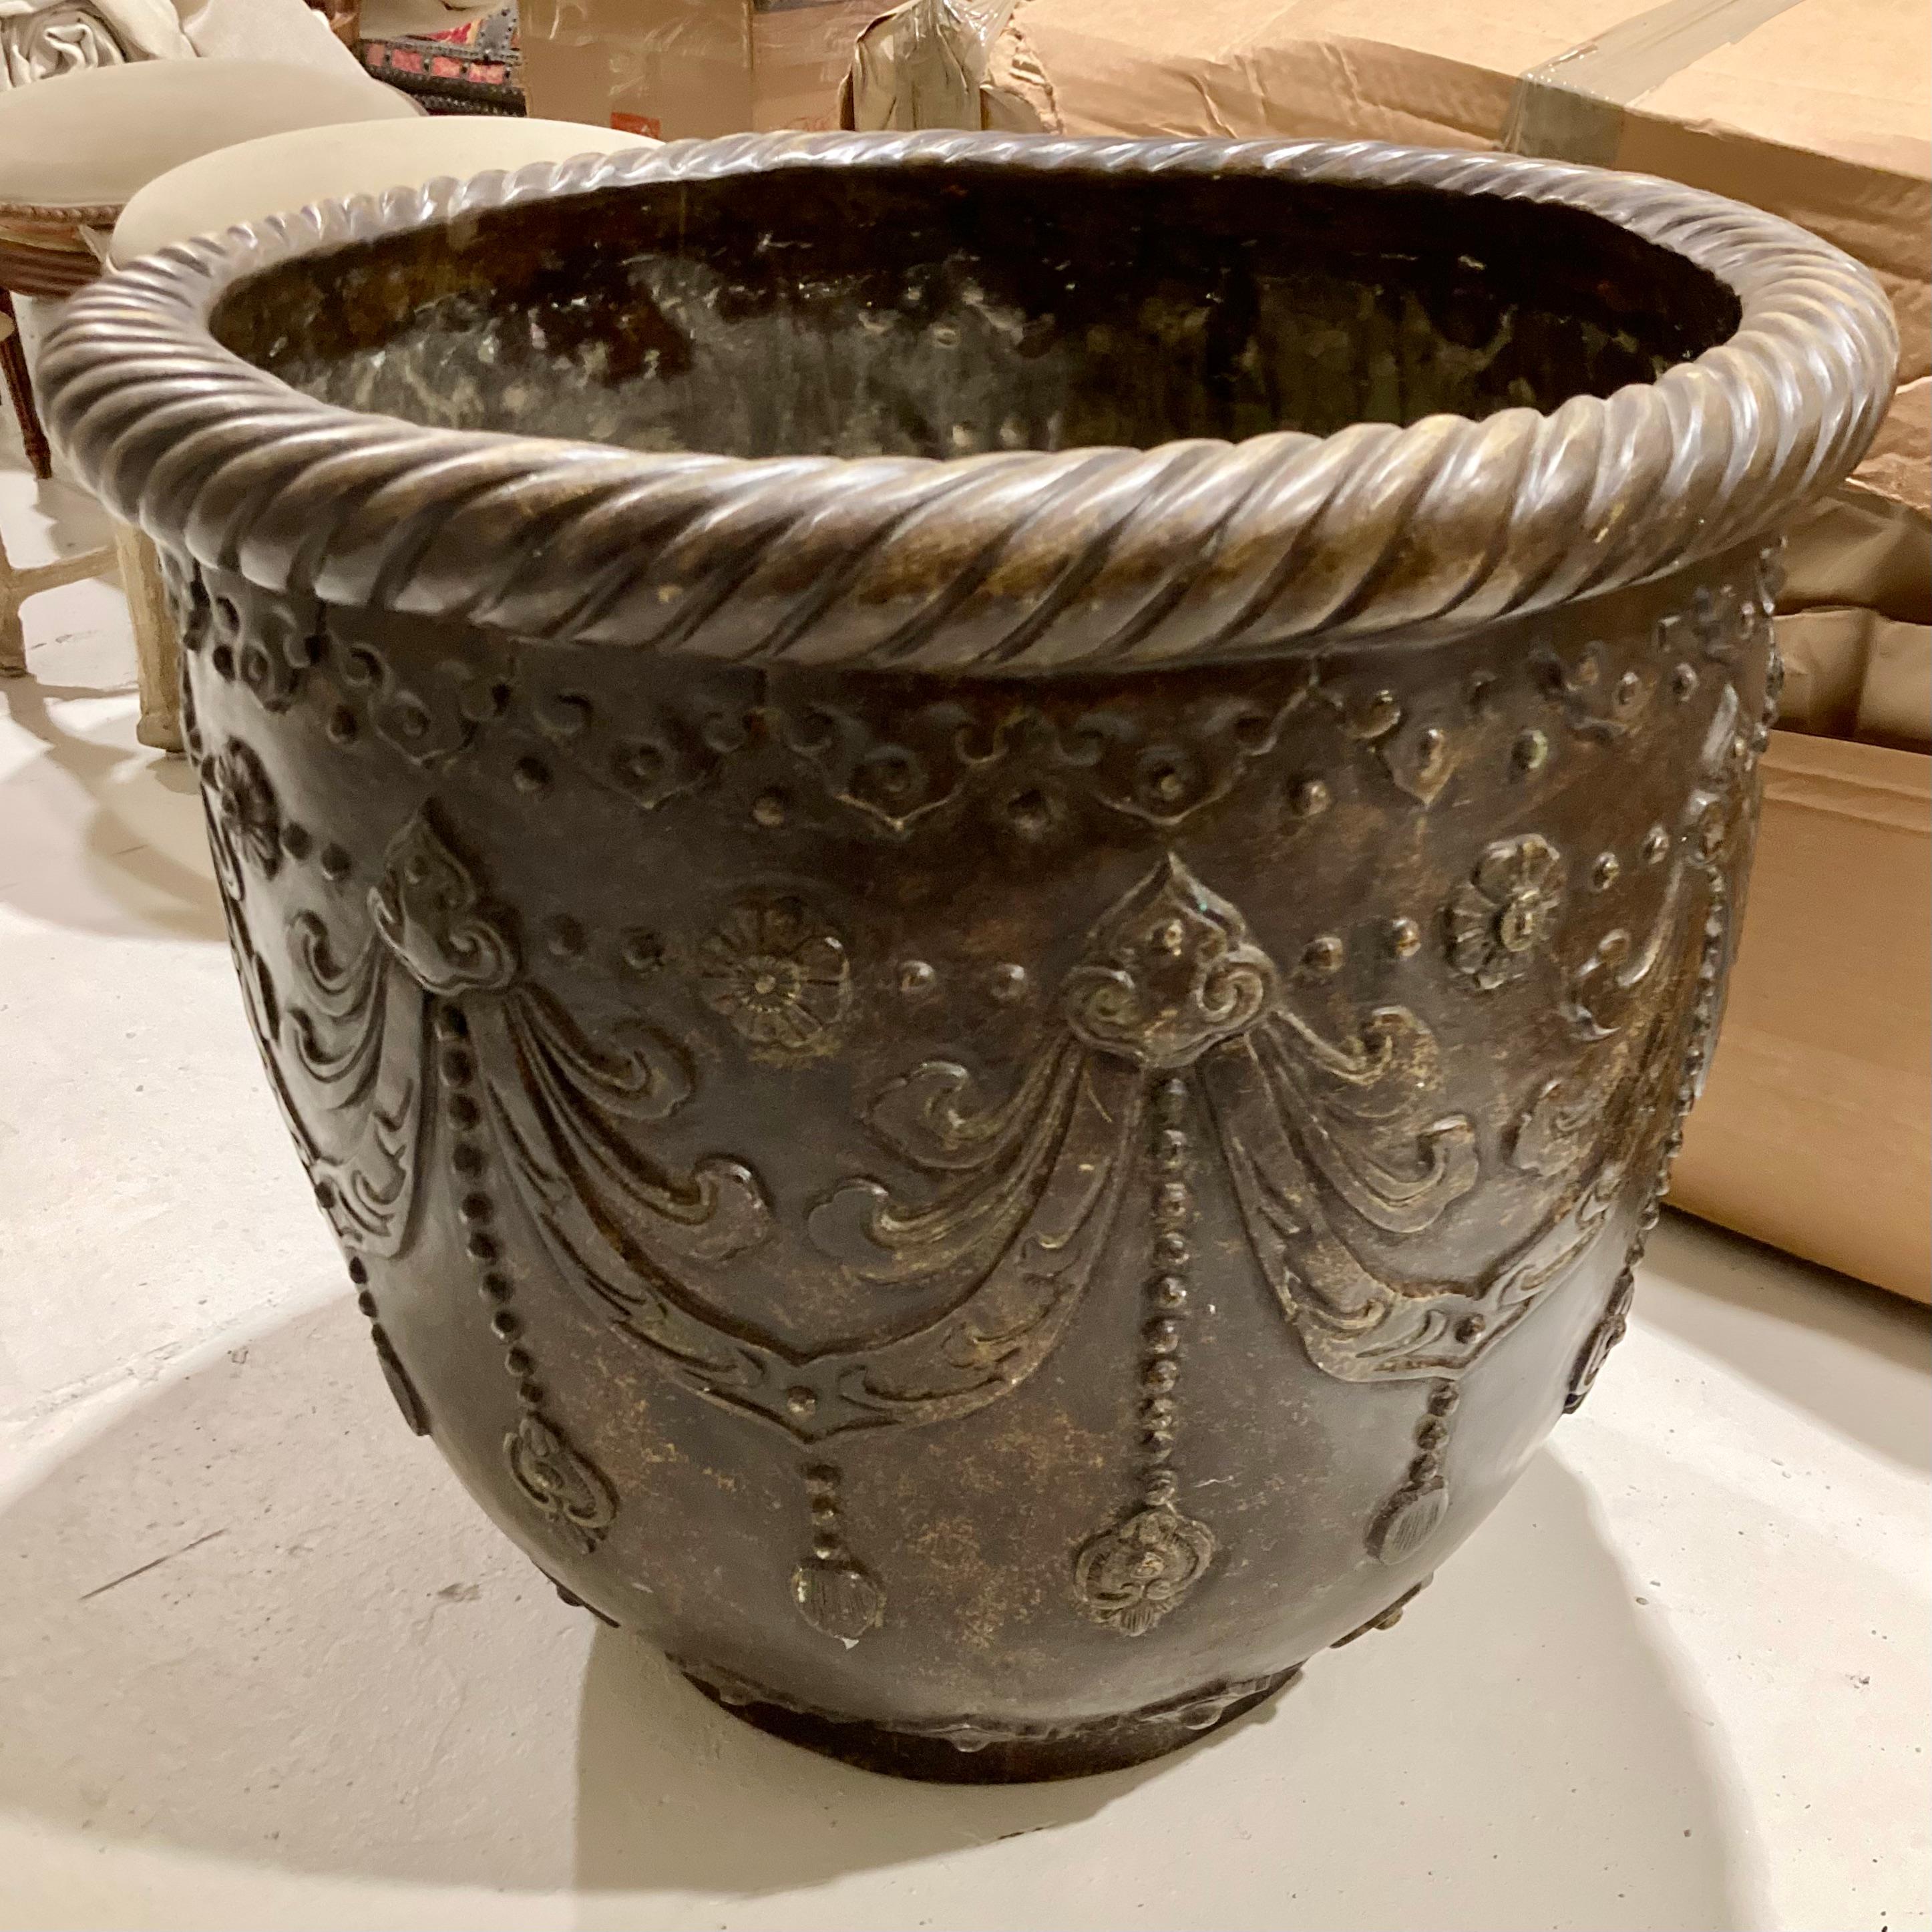 Beautiful French solid bronze planter. Early 20th Century and nice decor designs on the casting of the bronze.